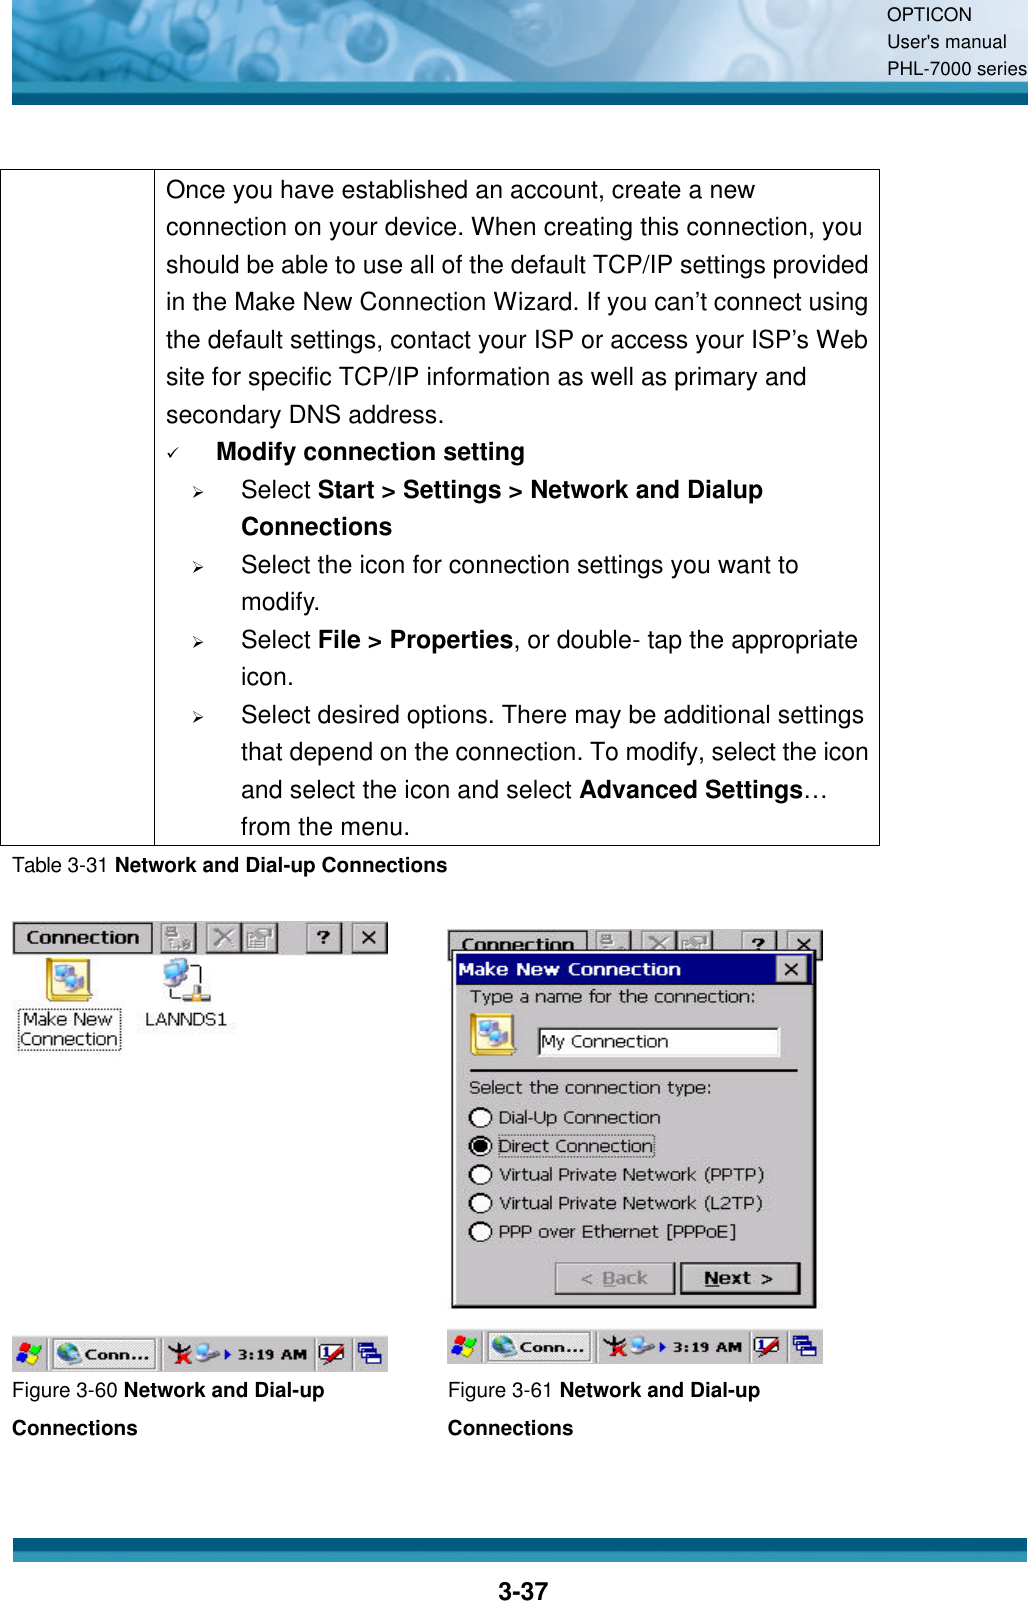 OPTICON User&apos;s manual PHL-7000 series    3-37   Once you have established an account, create a new connection on your device. When creating this connection, you should be able to use all of the default TCP/IP settings provided in the Make New Connection Wizard. If you can’t connect using the default settings, contact your ISP or access your ISP’s Web site for specific TCP/IP information as well as primary and secondary DNS address. ü Modify connection setting Ø Select Start &gt; Settings &gt; Network and Dialup Connections Ø Select the icon for connection settings you want to modify. Ø Select File &gt; Properties, or double- tap the appropriate icon. Ø Select desired options. There may be additional settings that depend on the connection. To modify, select the icon and select the icon and select Advanced Settings… from the menu. Table 3-31 Network and Dial-up Connections    Figure 3-60 Network and Dial-up Connections Figure 3-61 Network and Dial-up Connections 